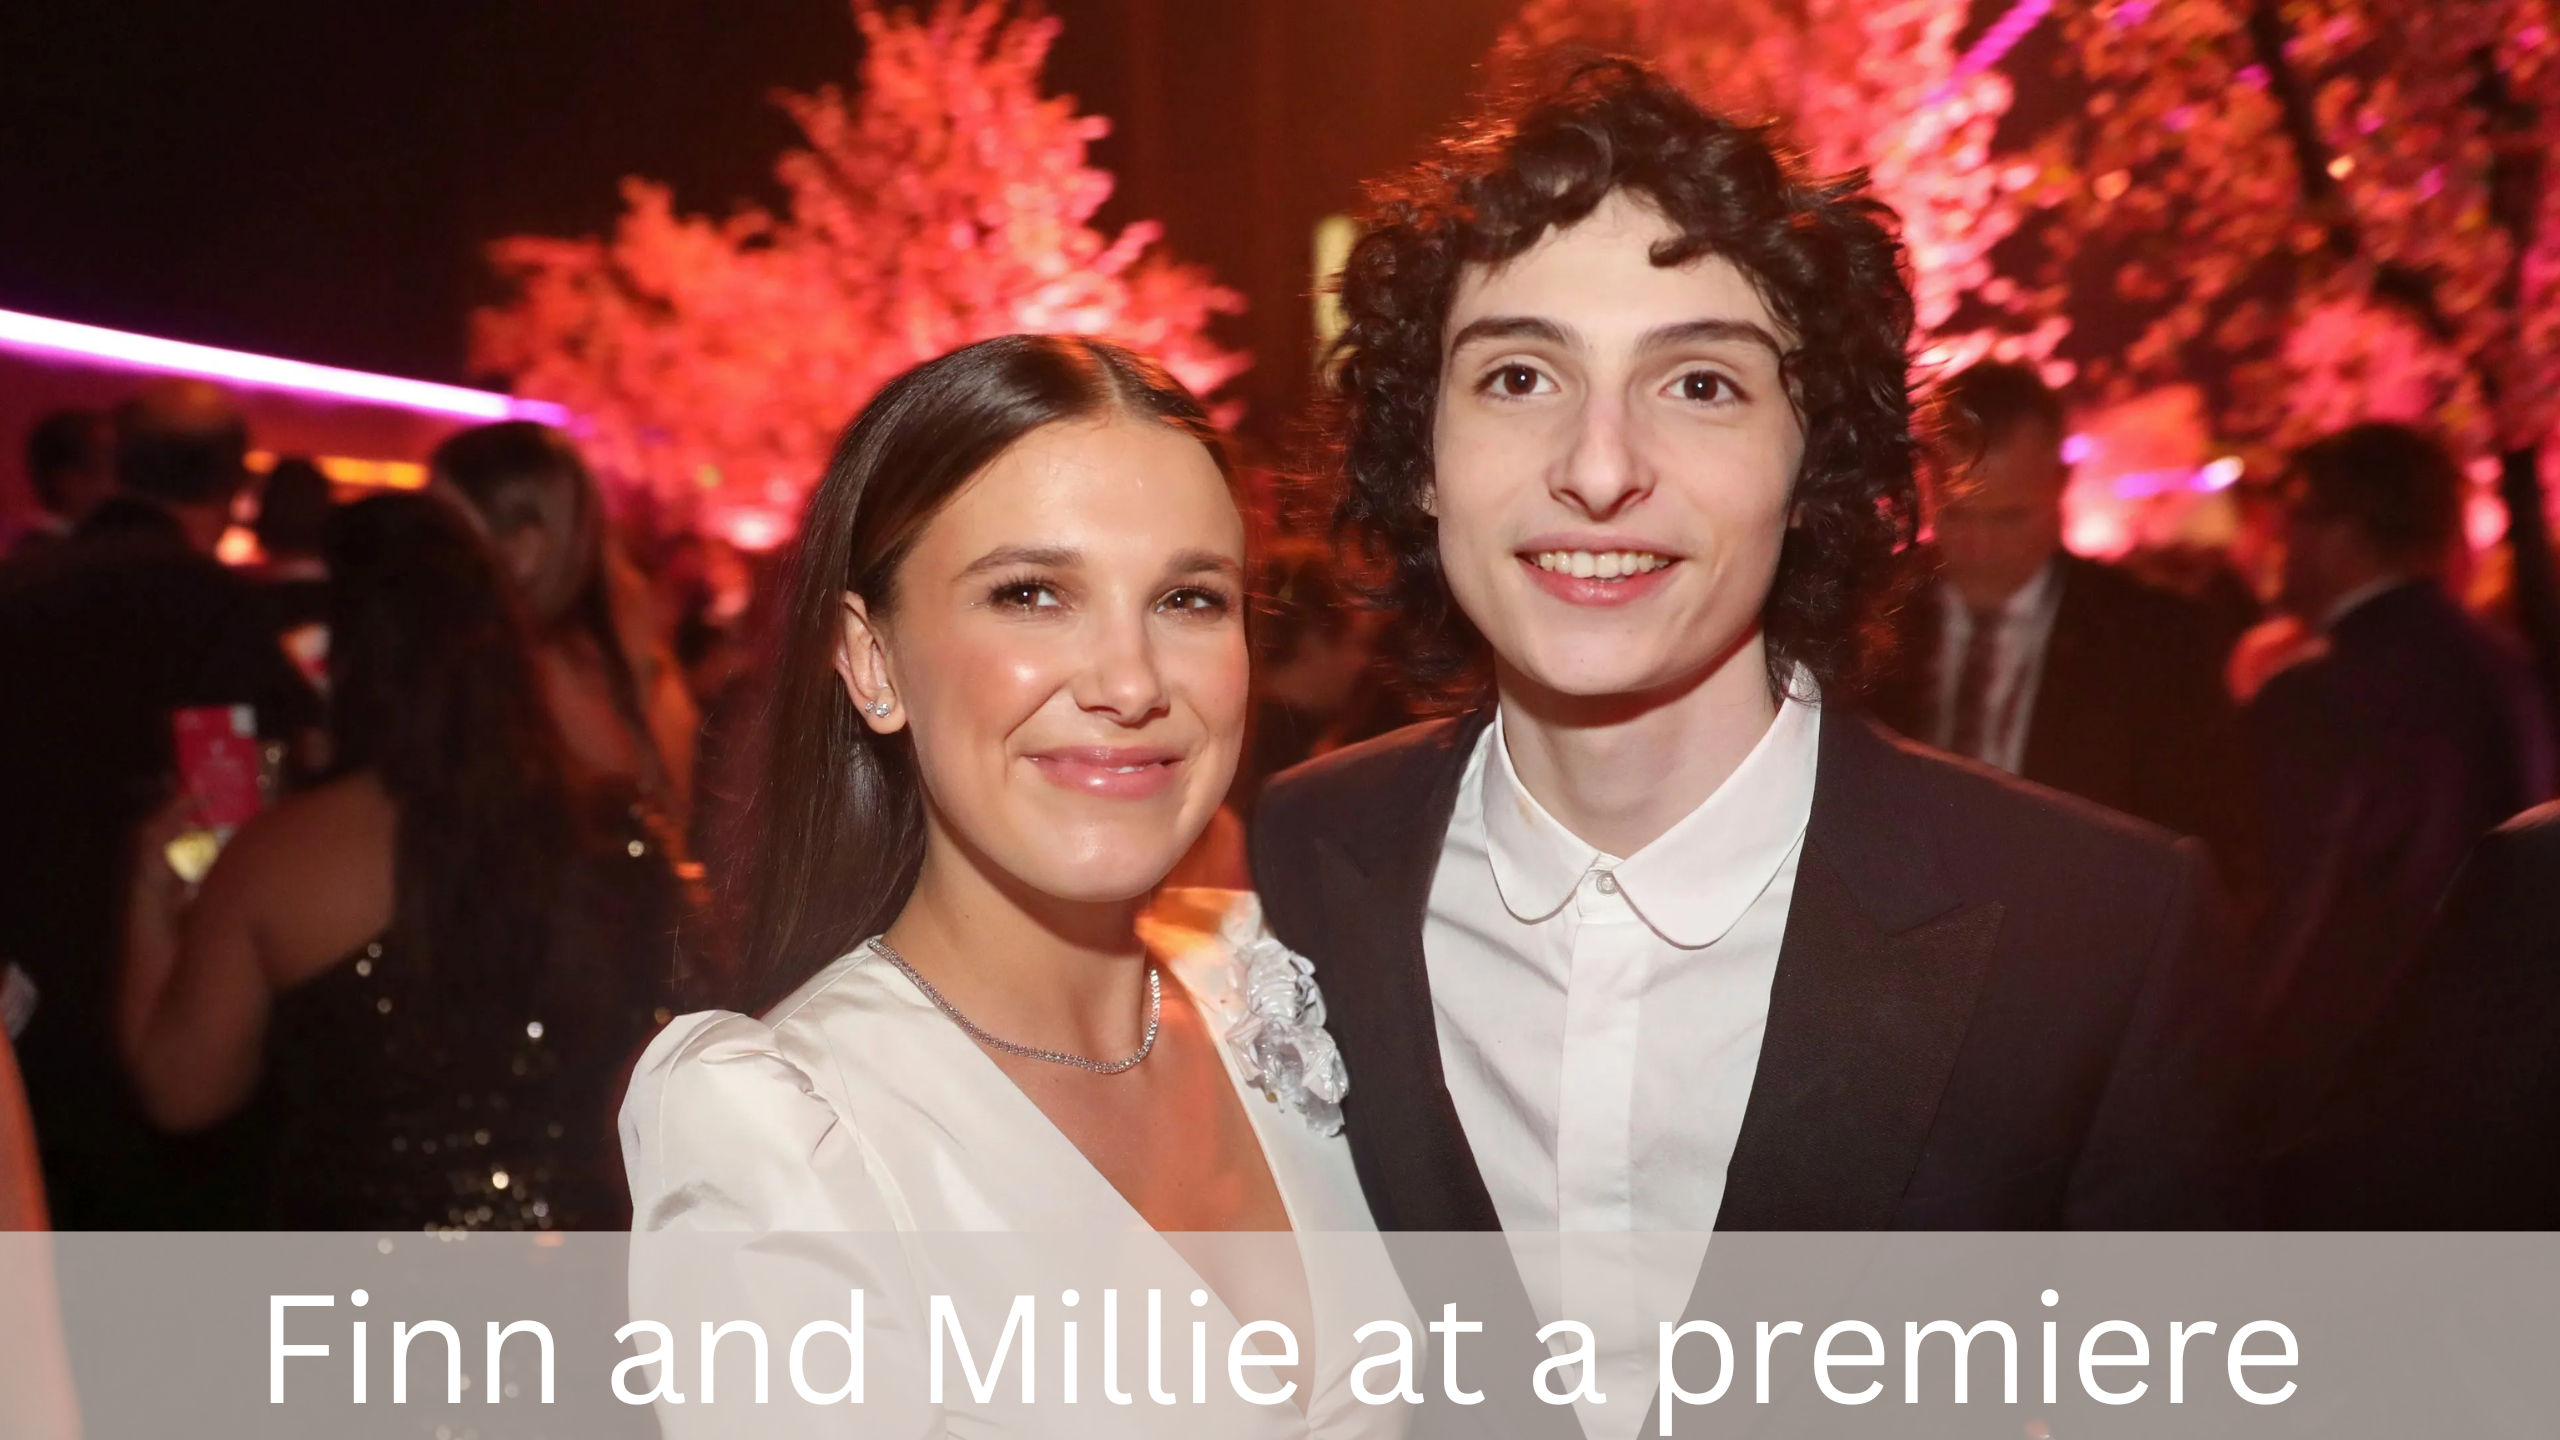 Finn and Millie at a premiere